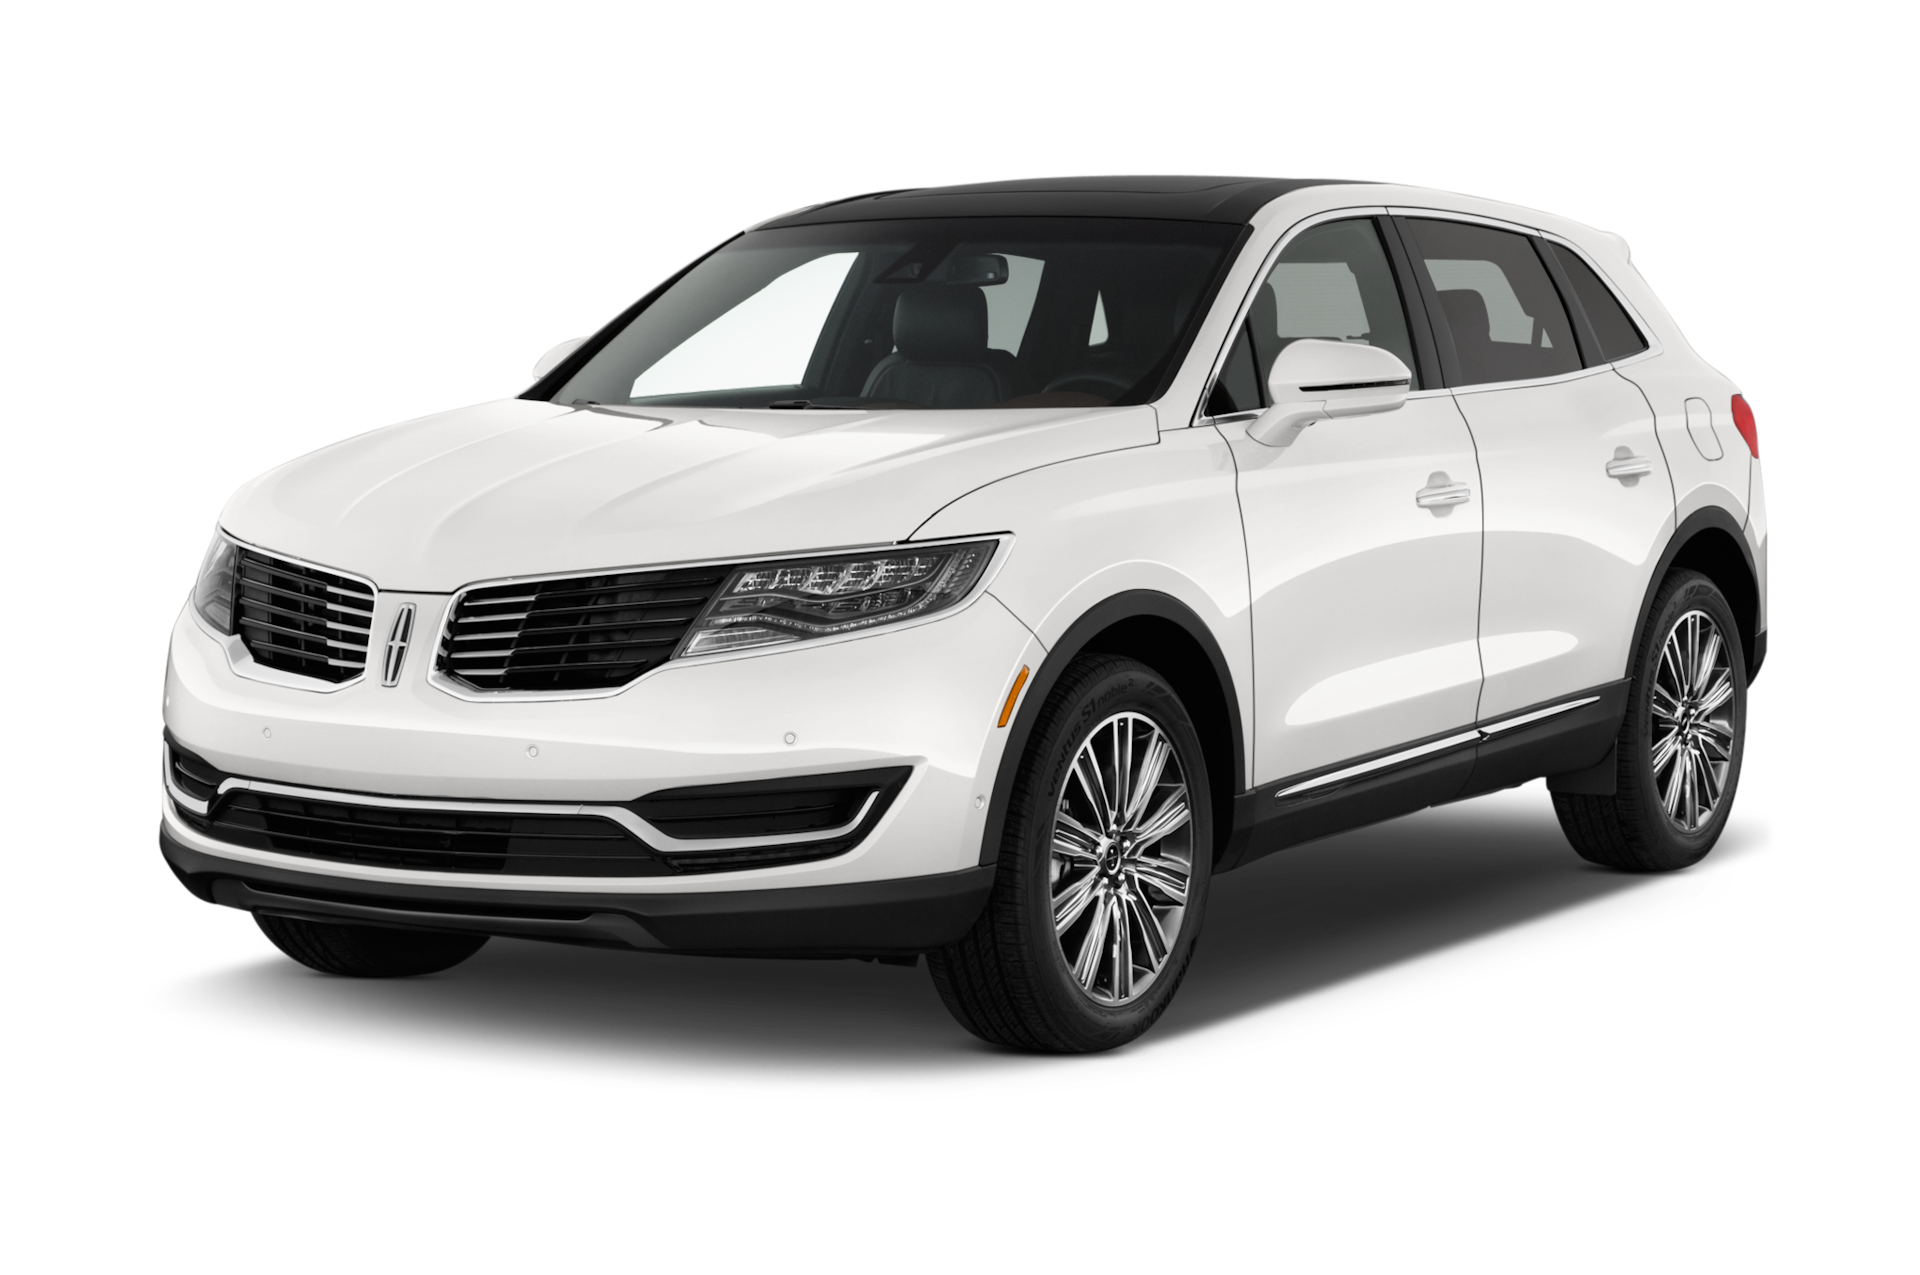 2018 Lincoln MKX Prices, Reviews, and Photos - MotorTrend